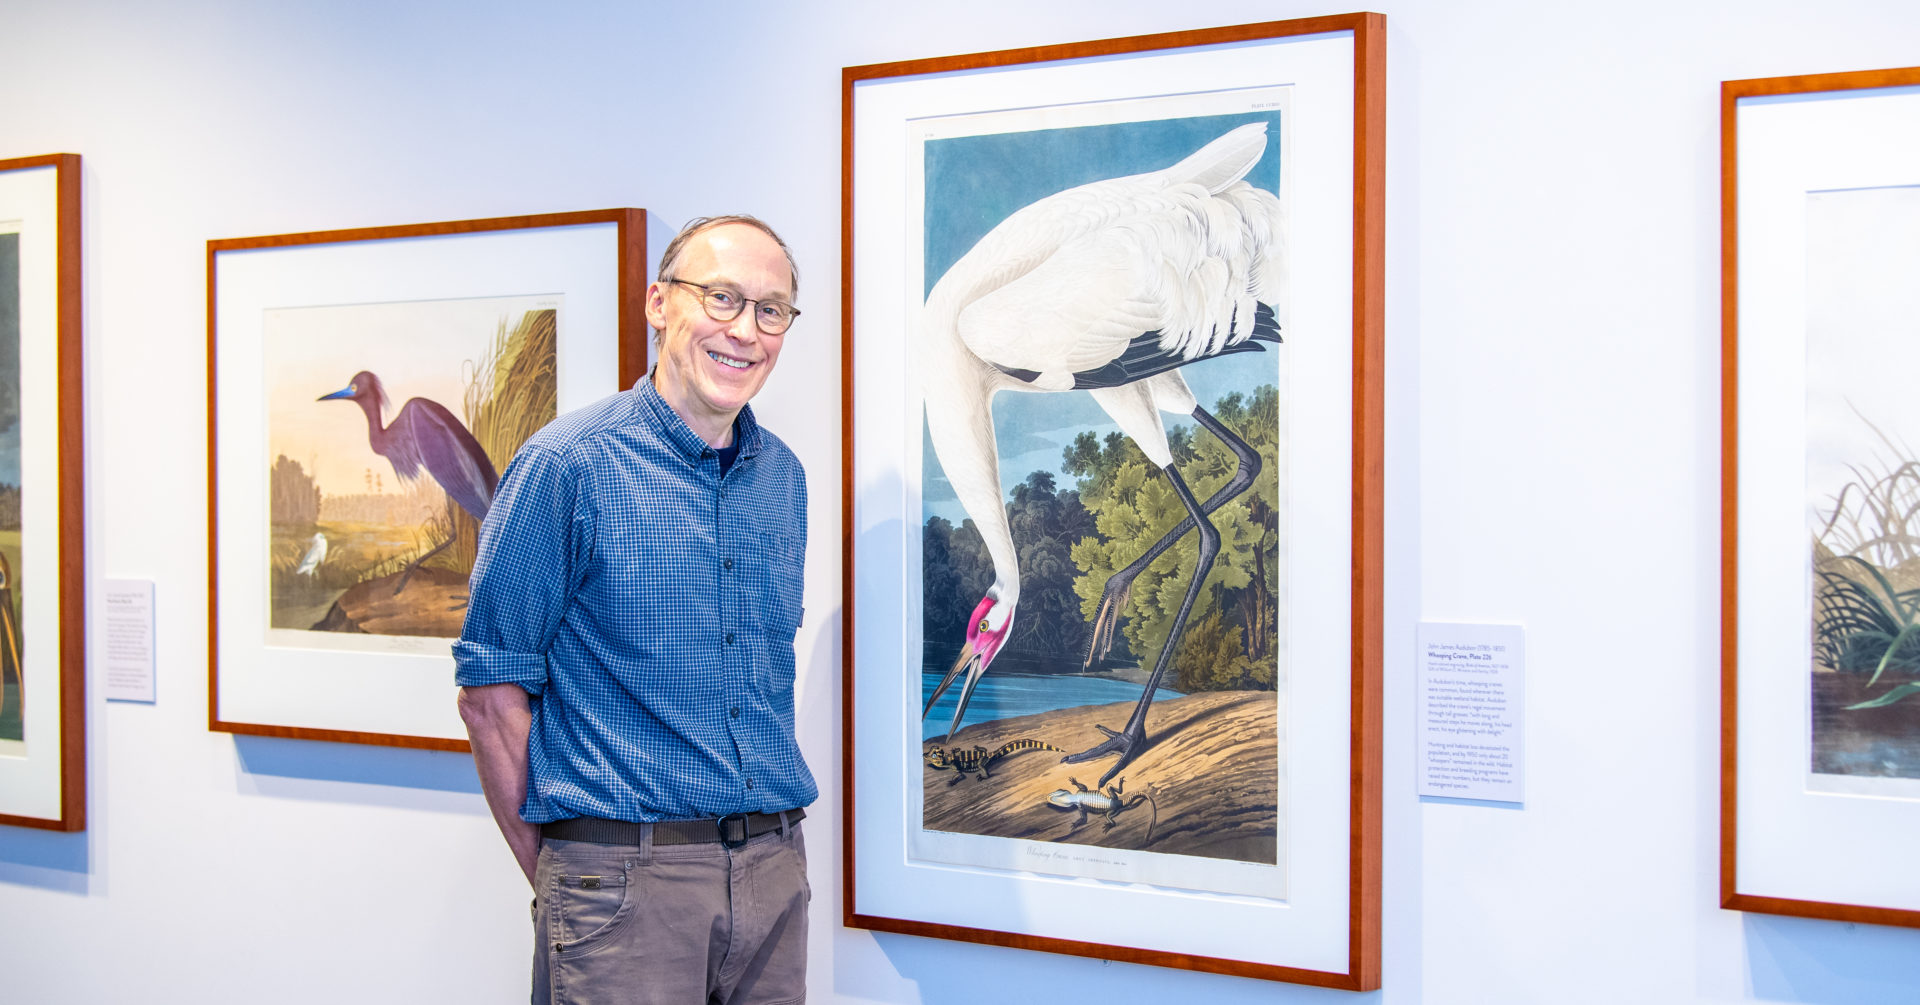 Don Luce standing next to an illustration of a bird